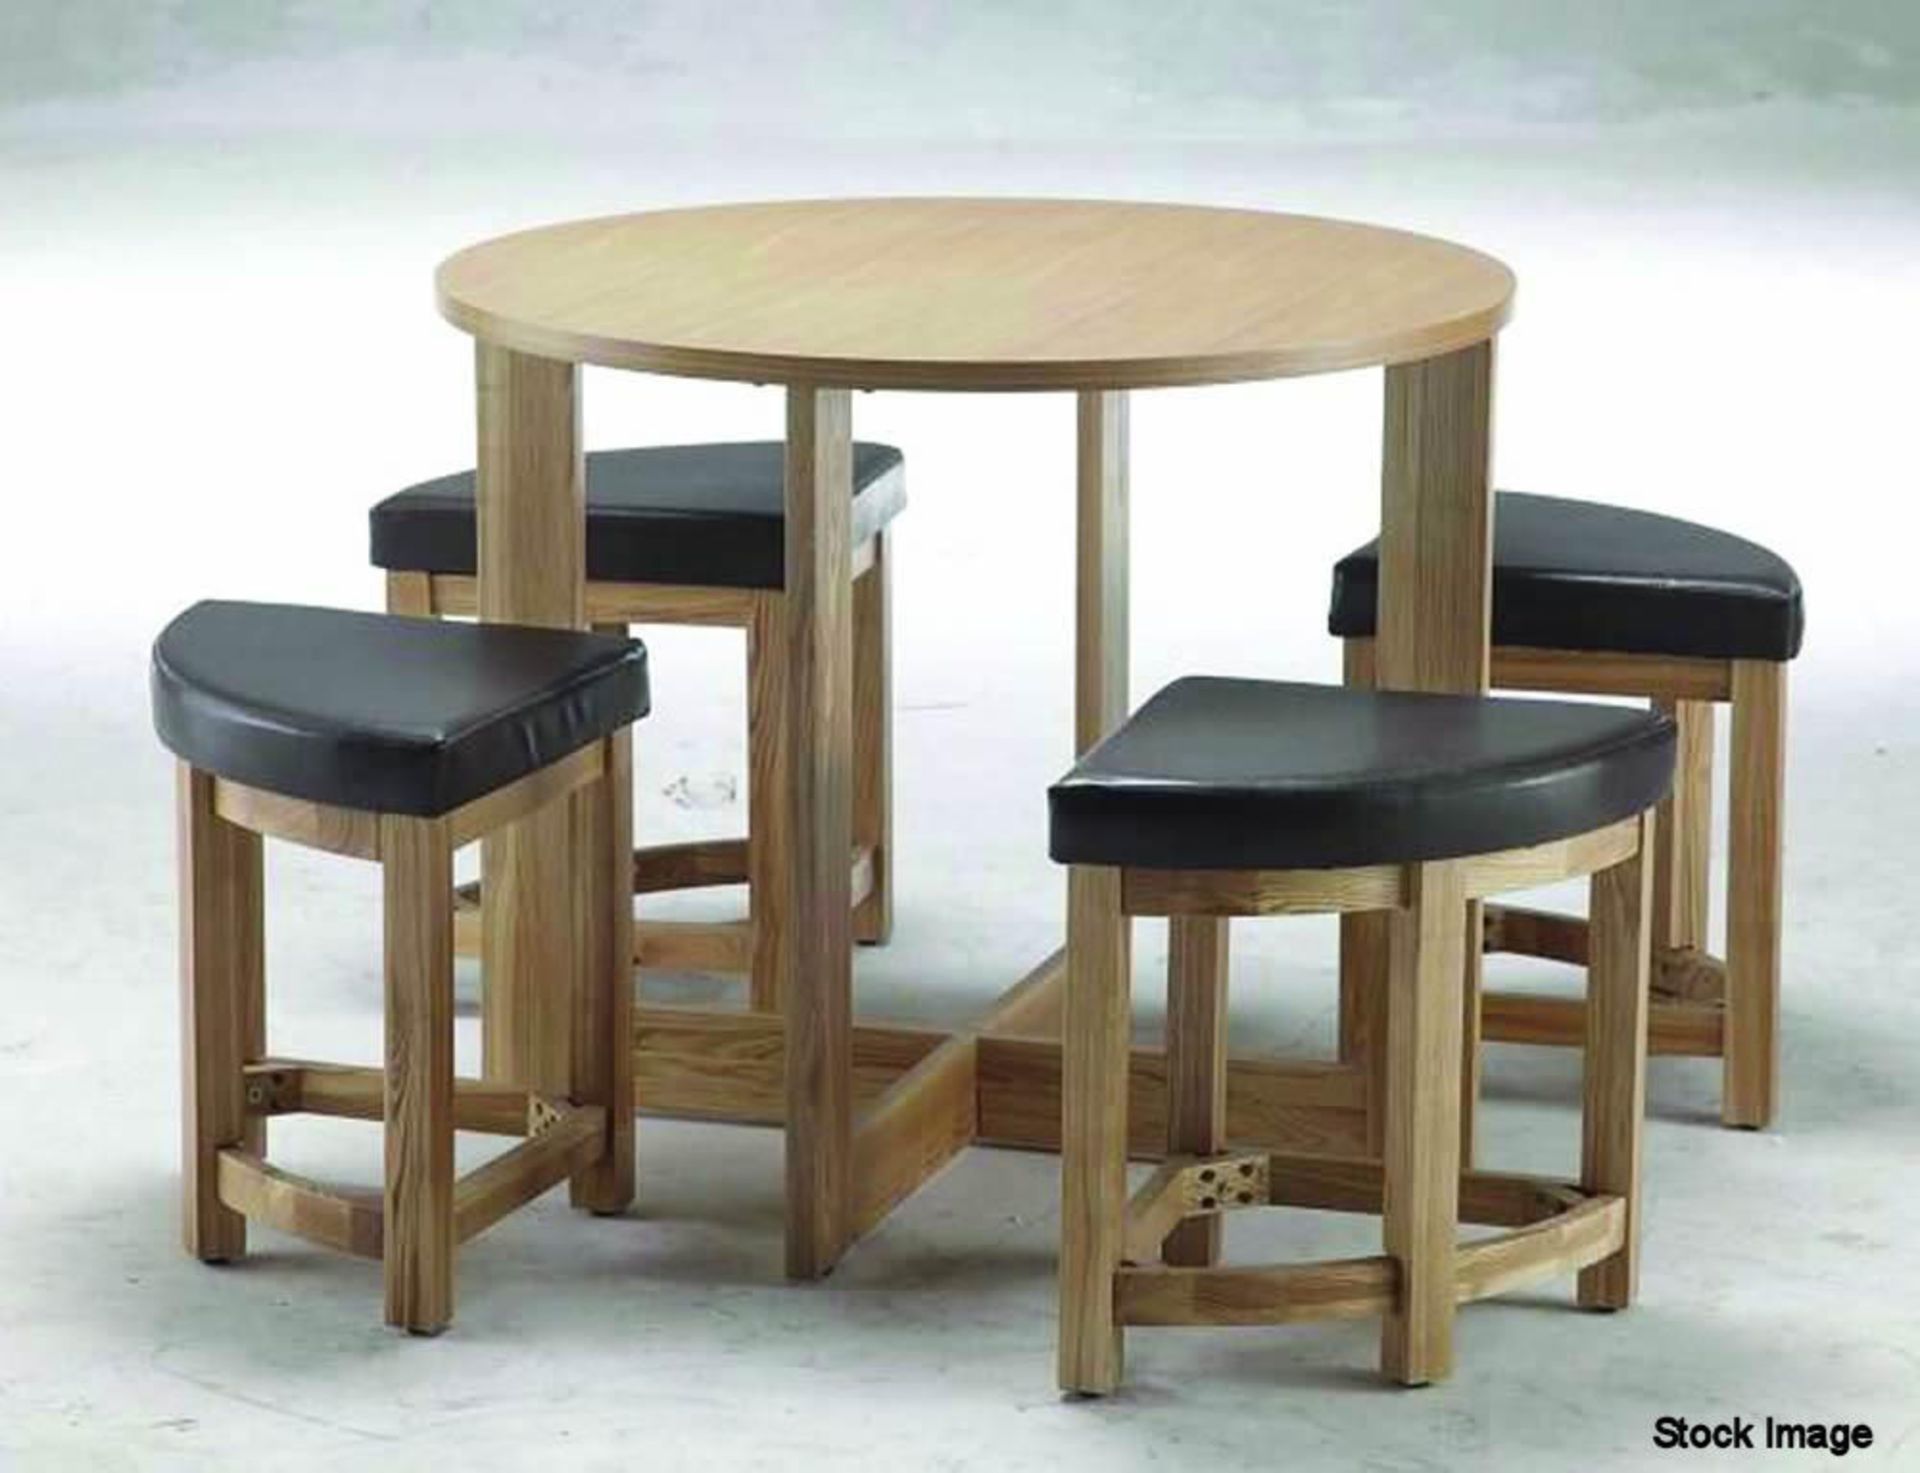 Oak Ash Veneer Stowaway Dining Table with 4 Brown Faux Leather Padded Stools - CL185 - Ref:OakSW - L - Image 3 of 9